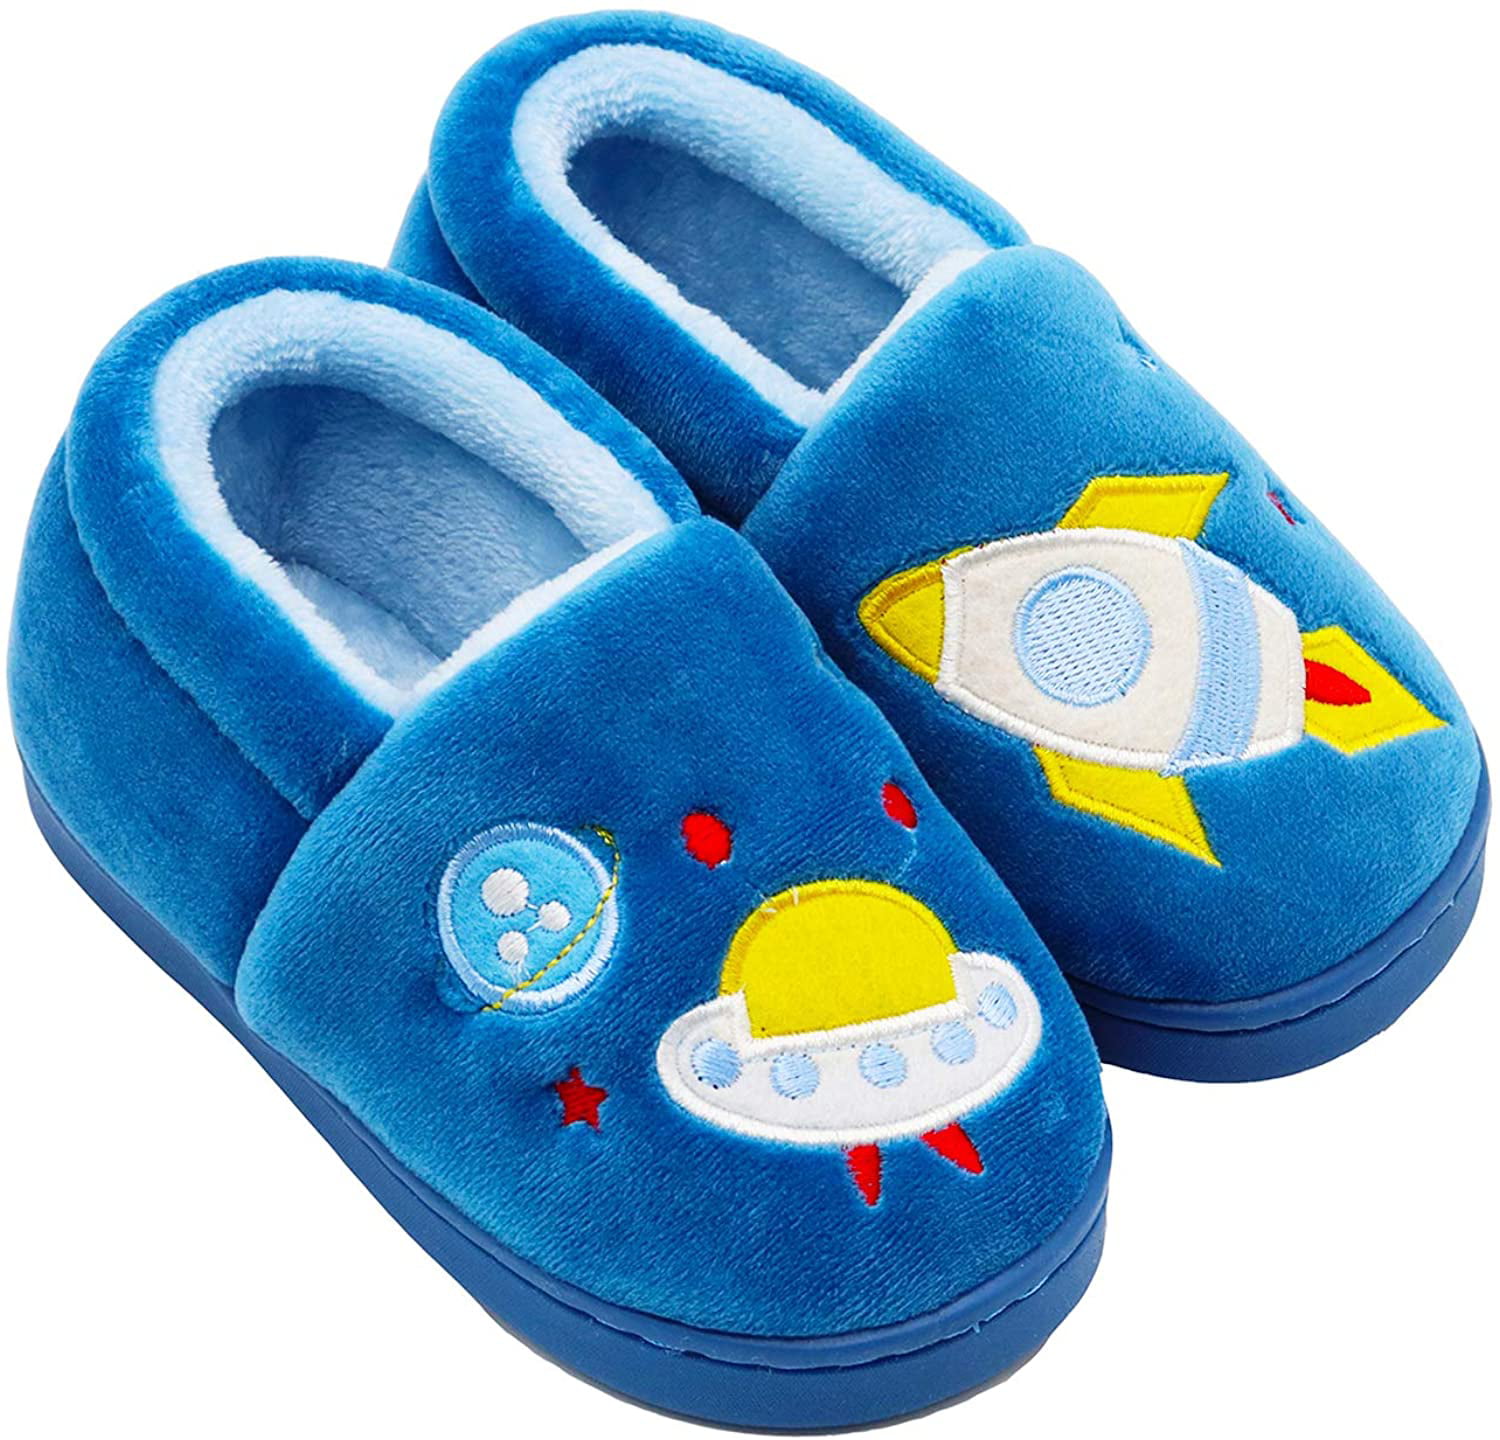 Kids Warm Cute Home Slippers Anti-Slip Fur Lined Winter Indoor Shoes Toddler Boys Girls House Slippers 